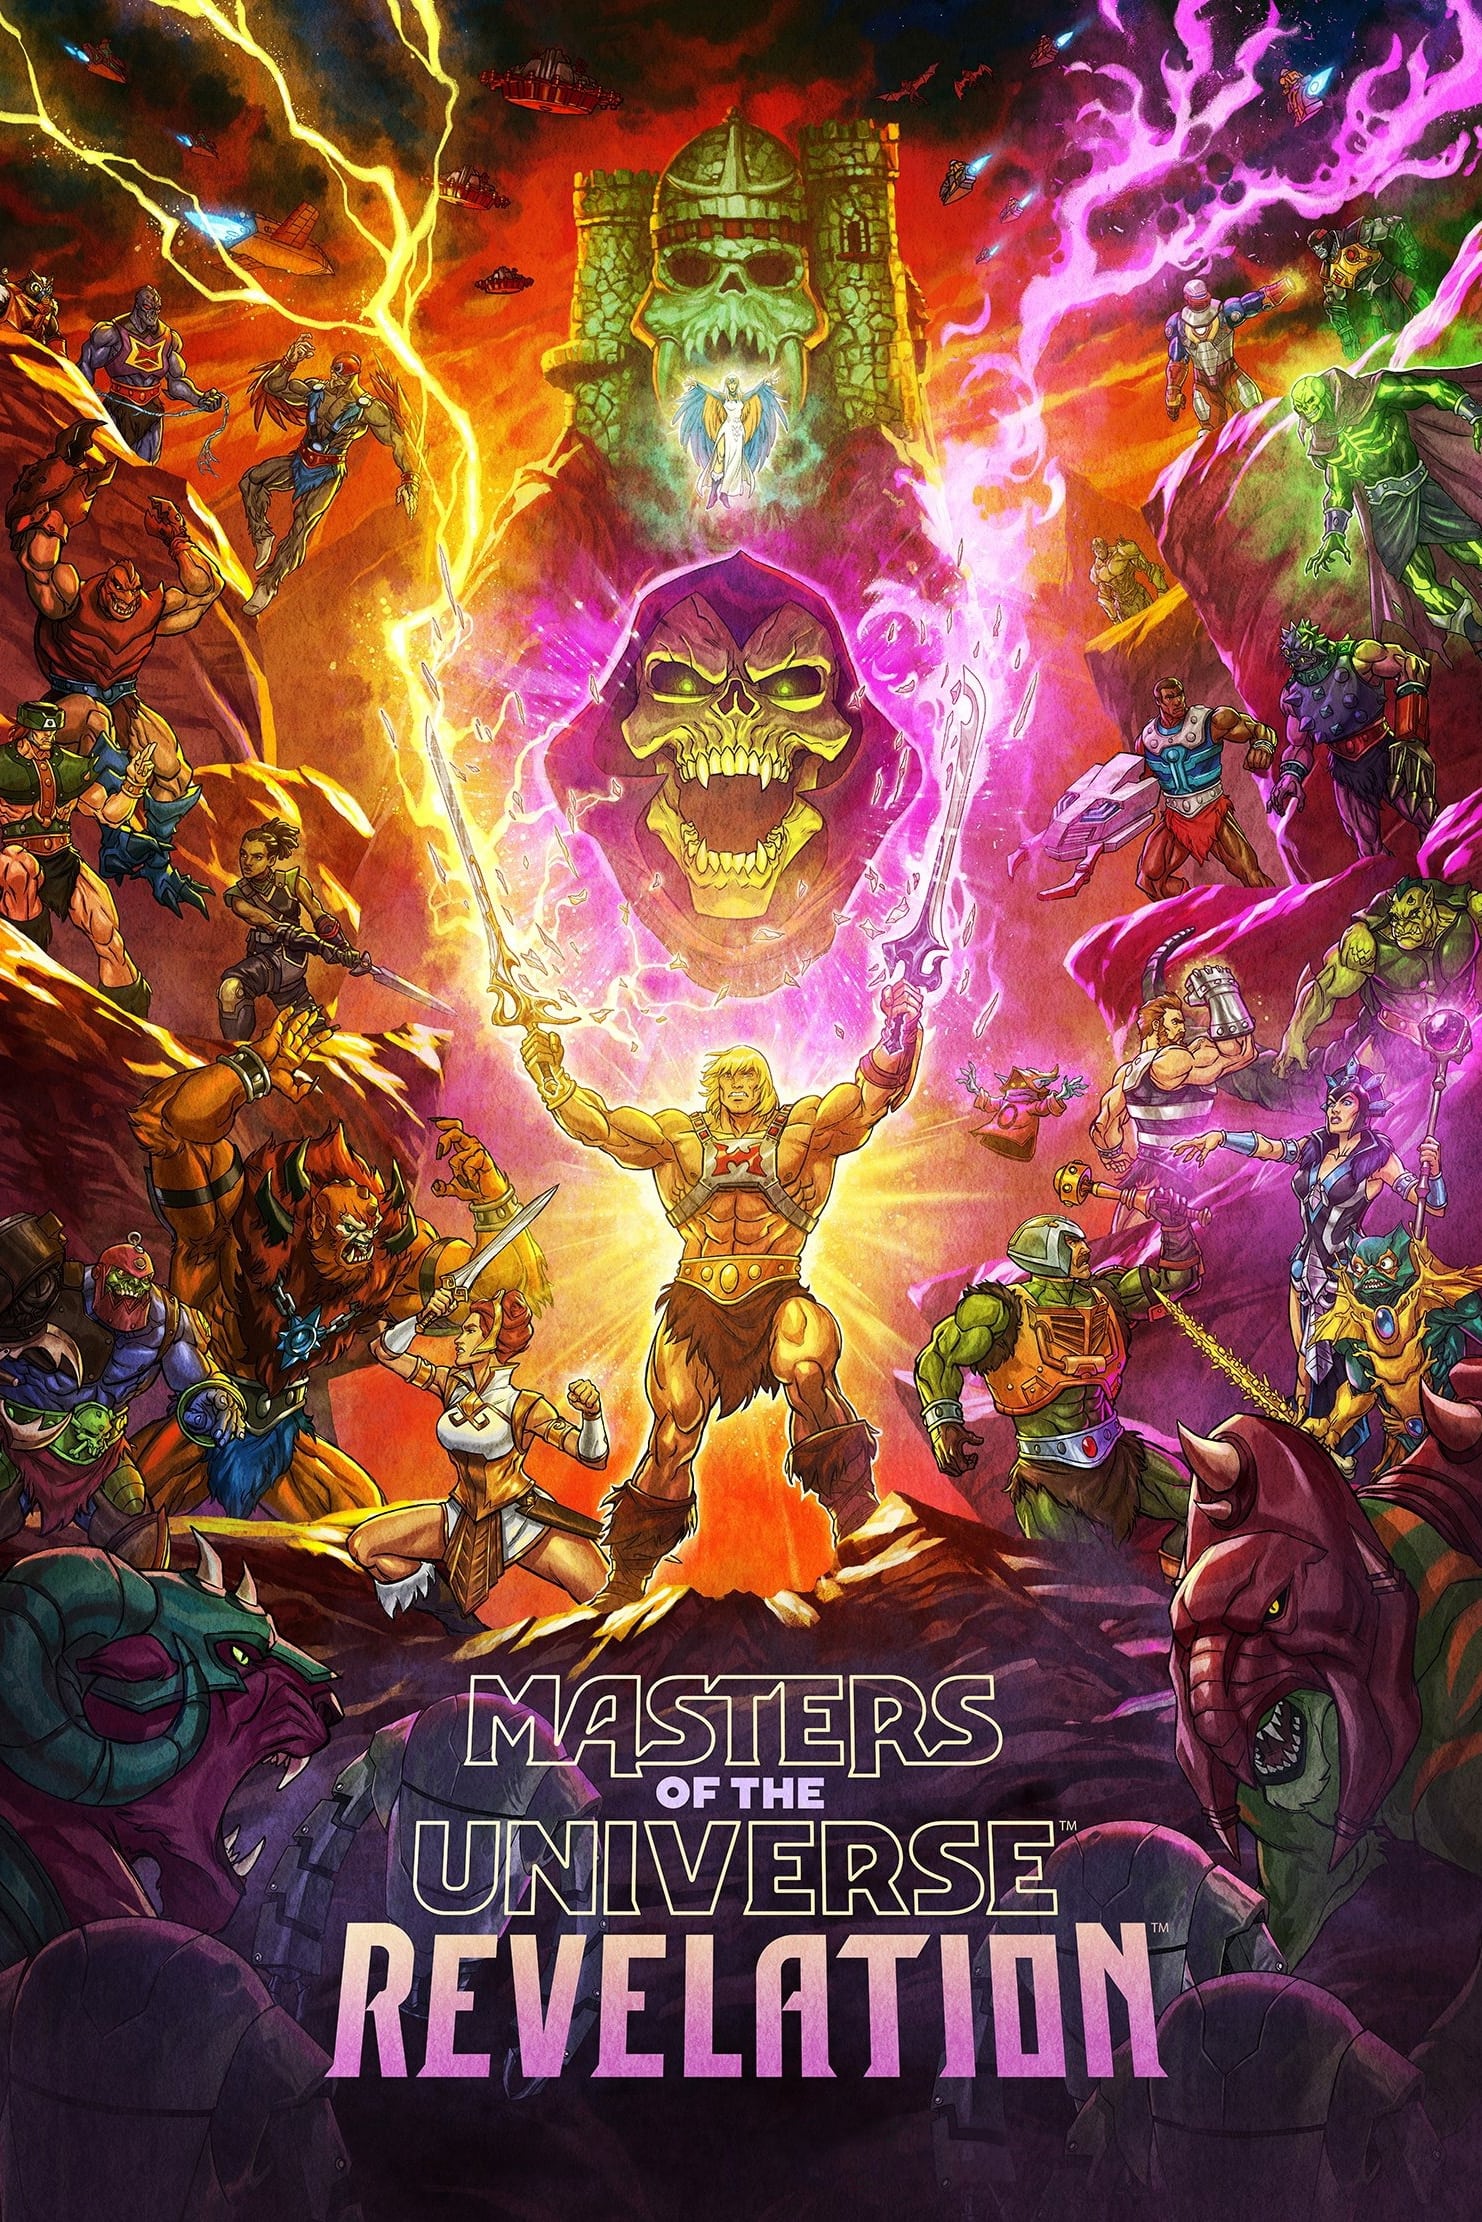 Masters of the Universe: Revelation TV Shows About Based On Toy